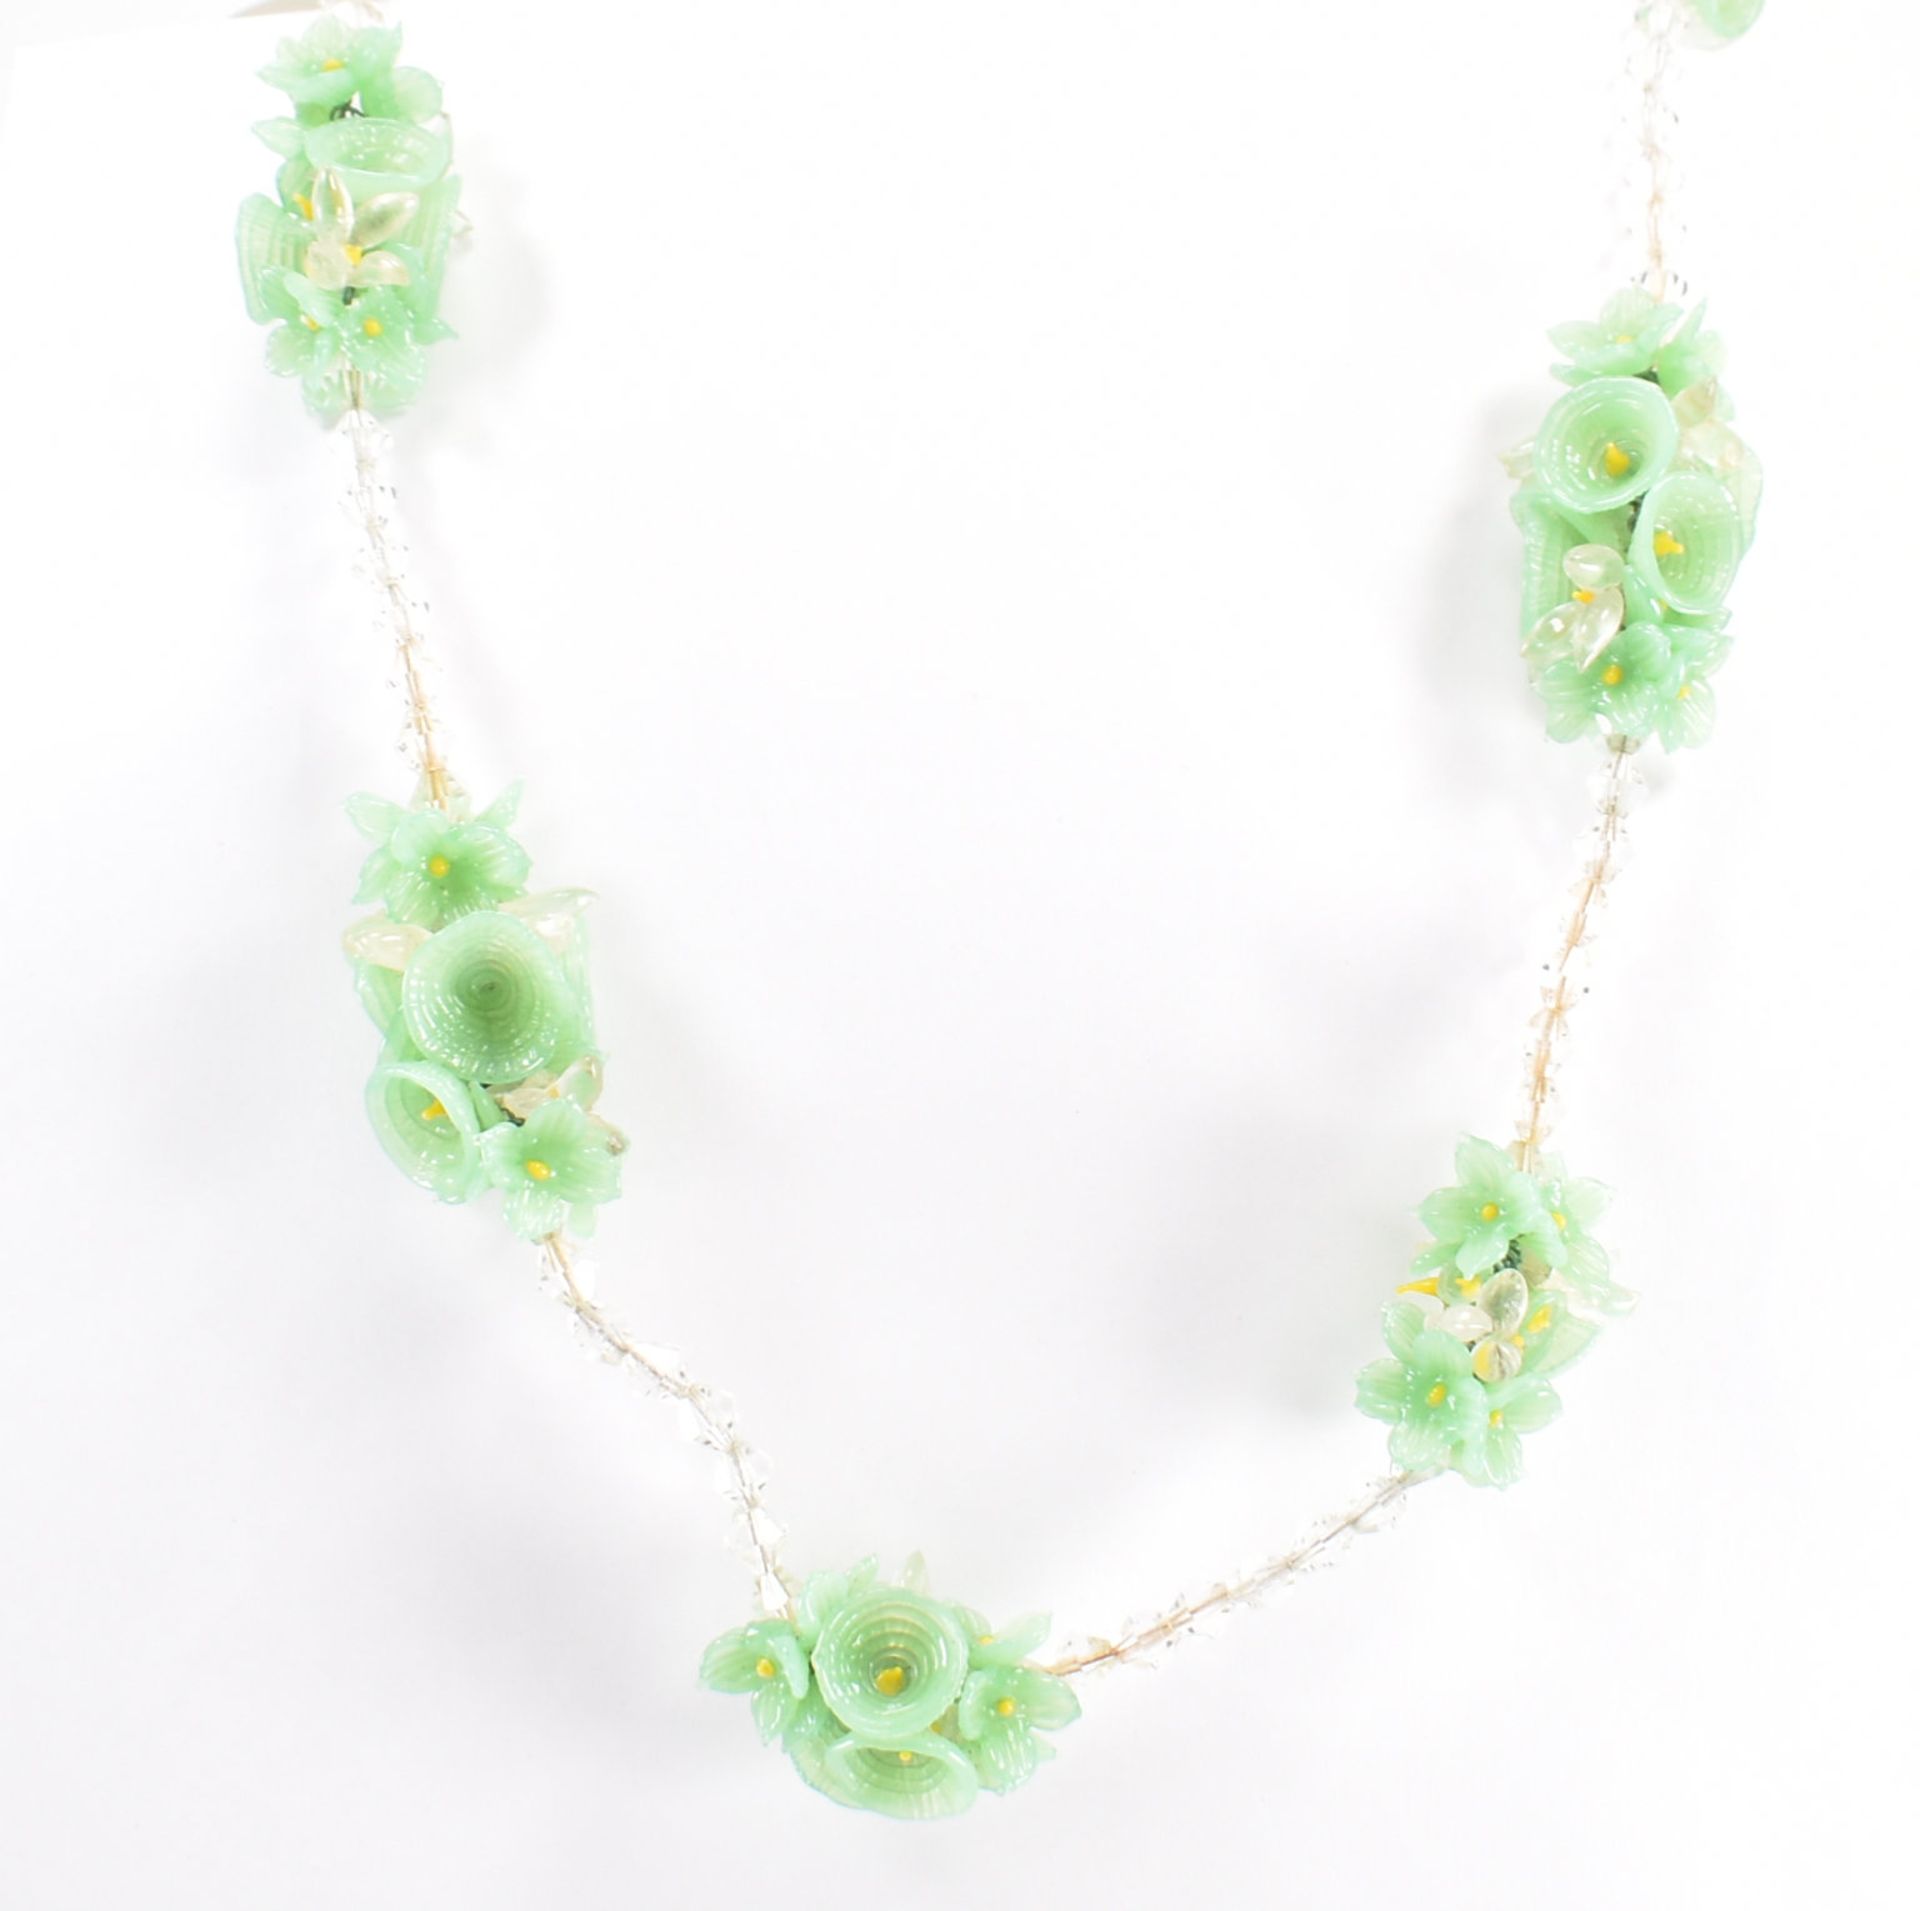 FRENCH 1930S GLASS BEADED NECKLACE - Image 3 of 5